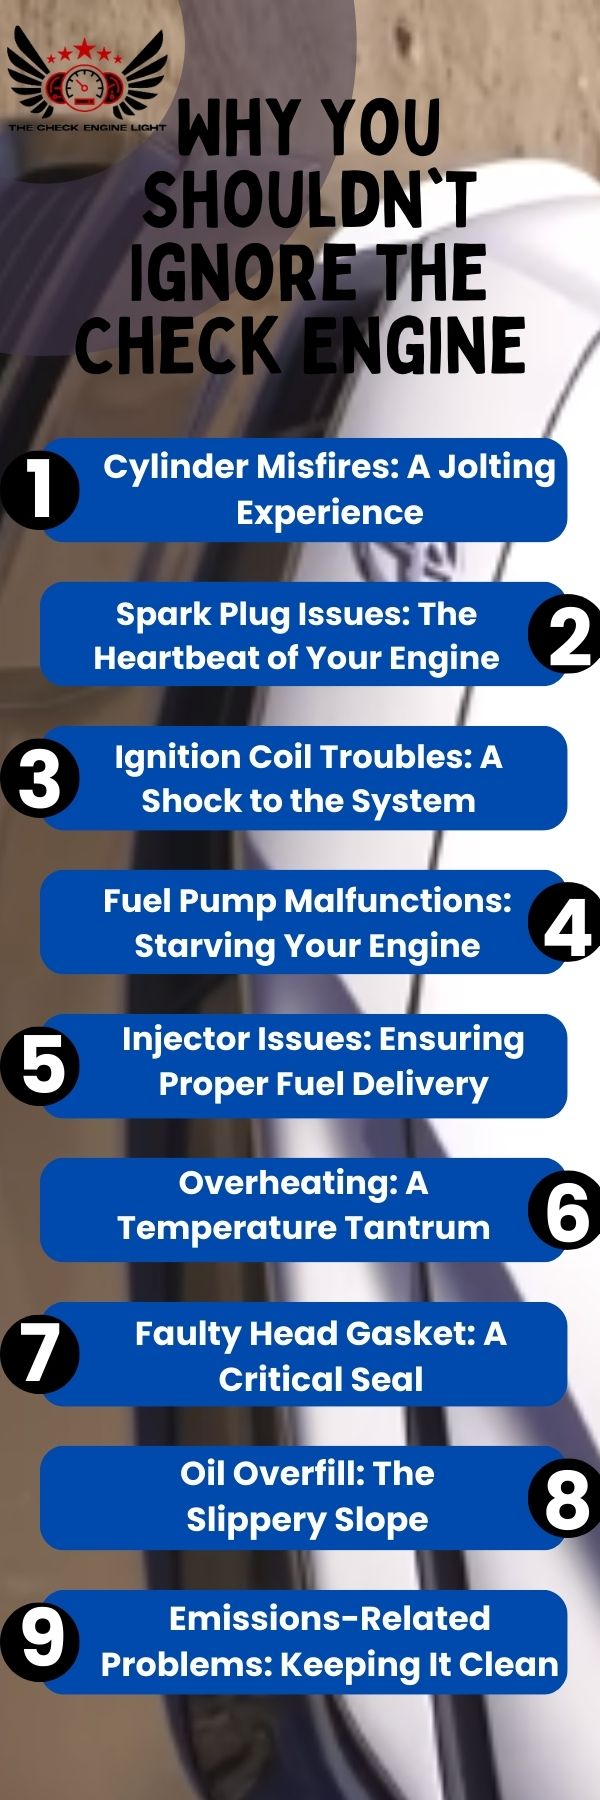 an infographic about Why You Shouldn't Ignore the Check Engine 